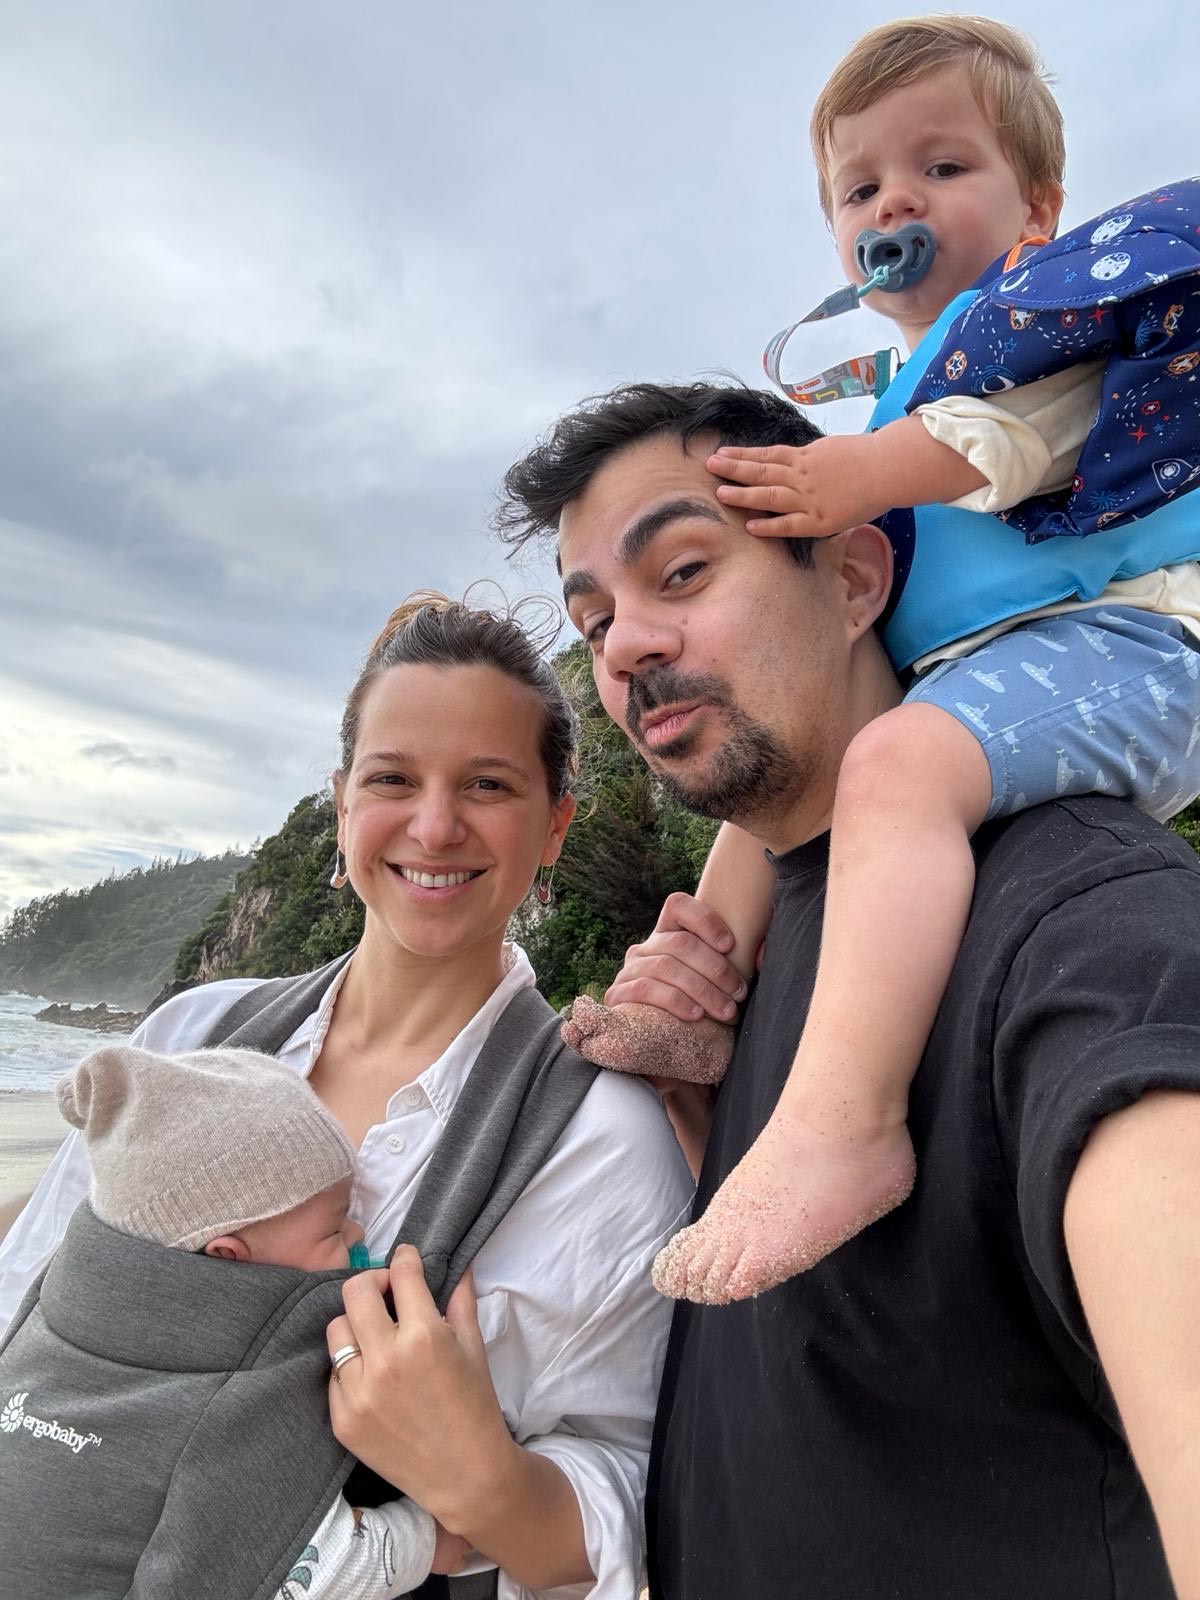 A family with two kids on a beach: one infant in a carrier and a toddler on his dad's shoulders.